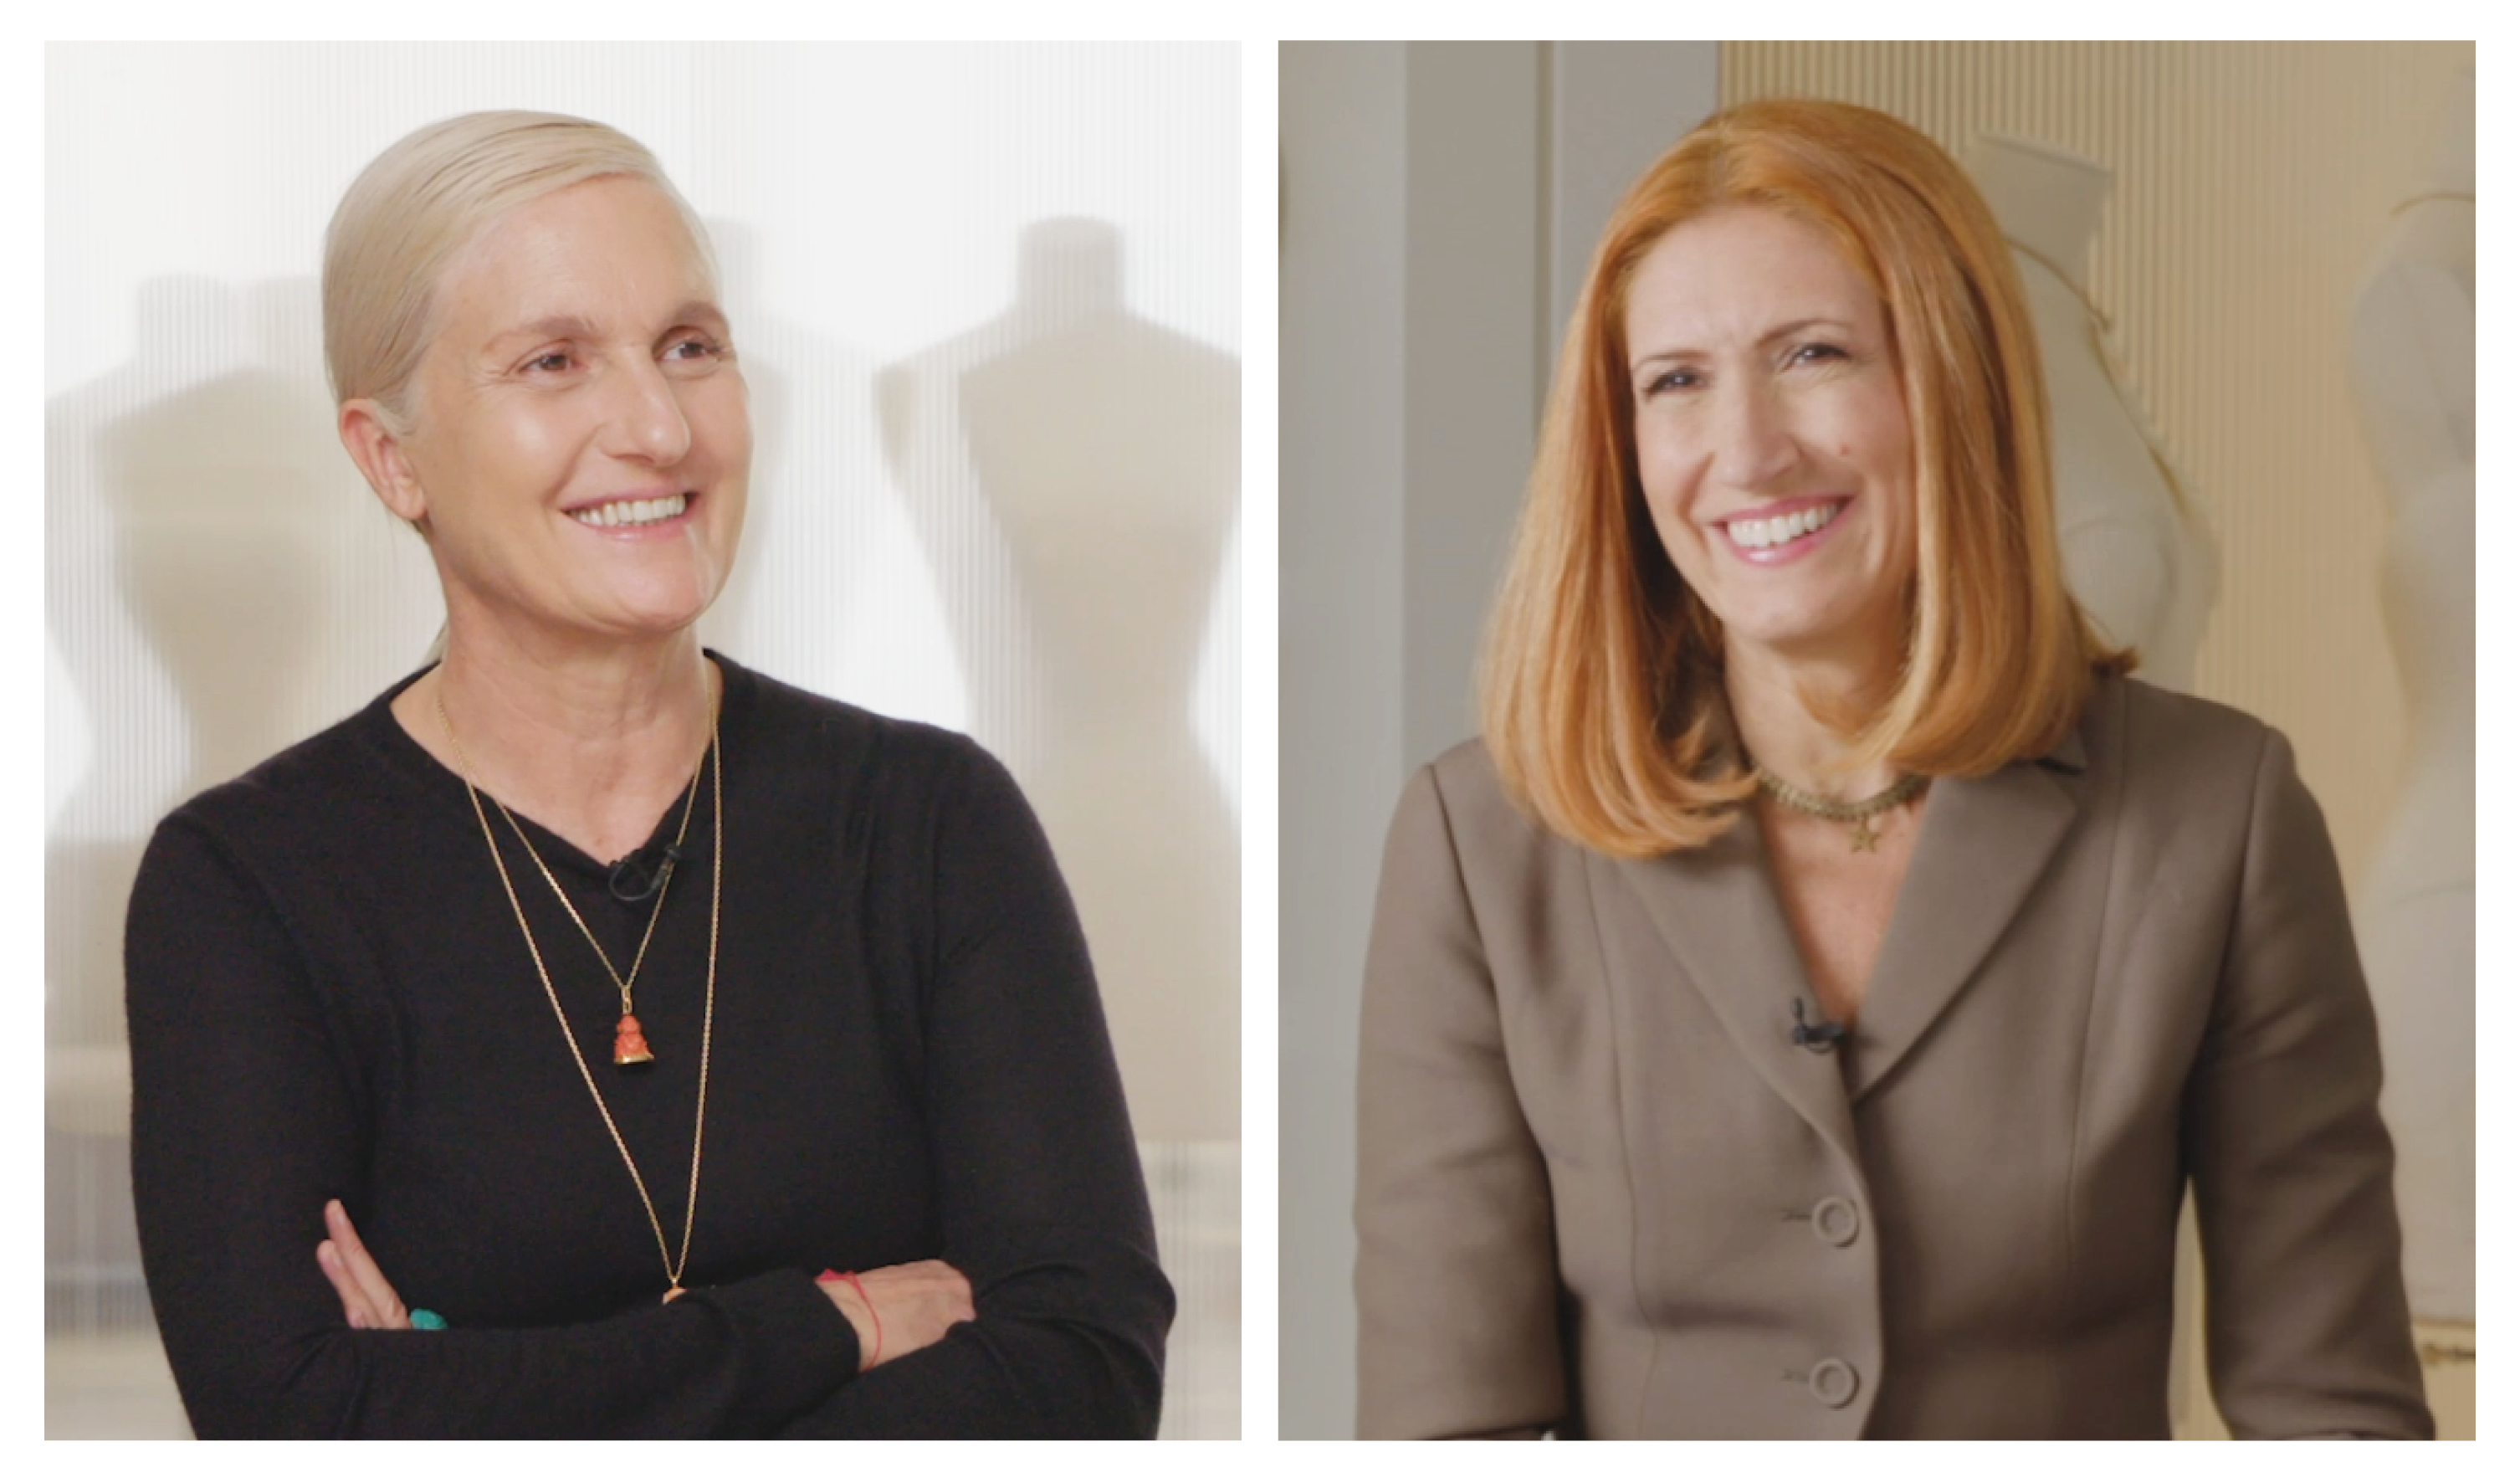 LVMH on Twitter: Since the creation of its Women@Dior mentoring